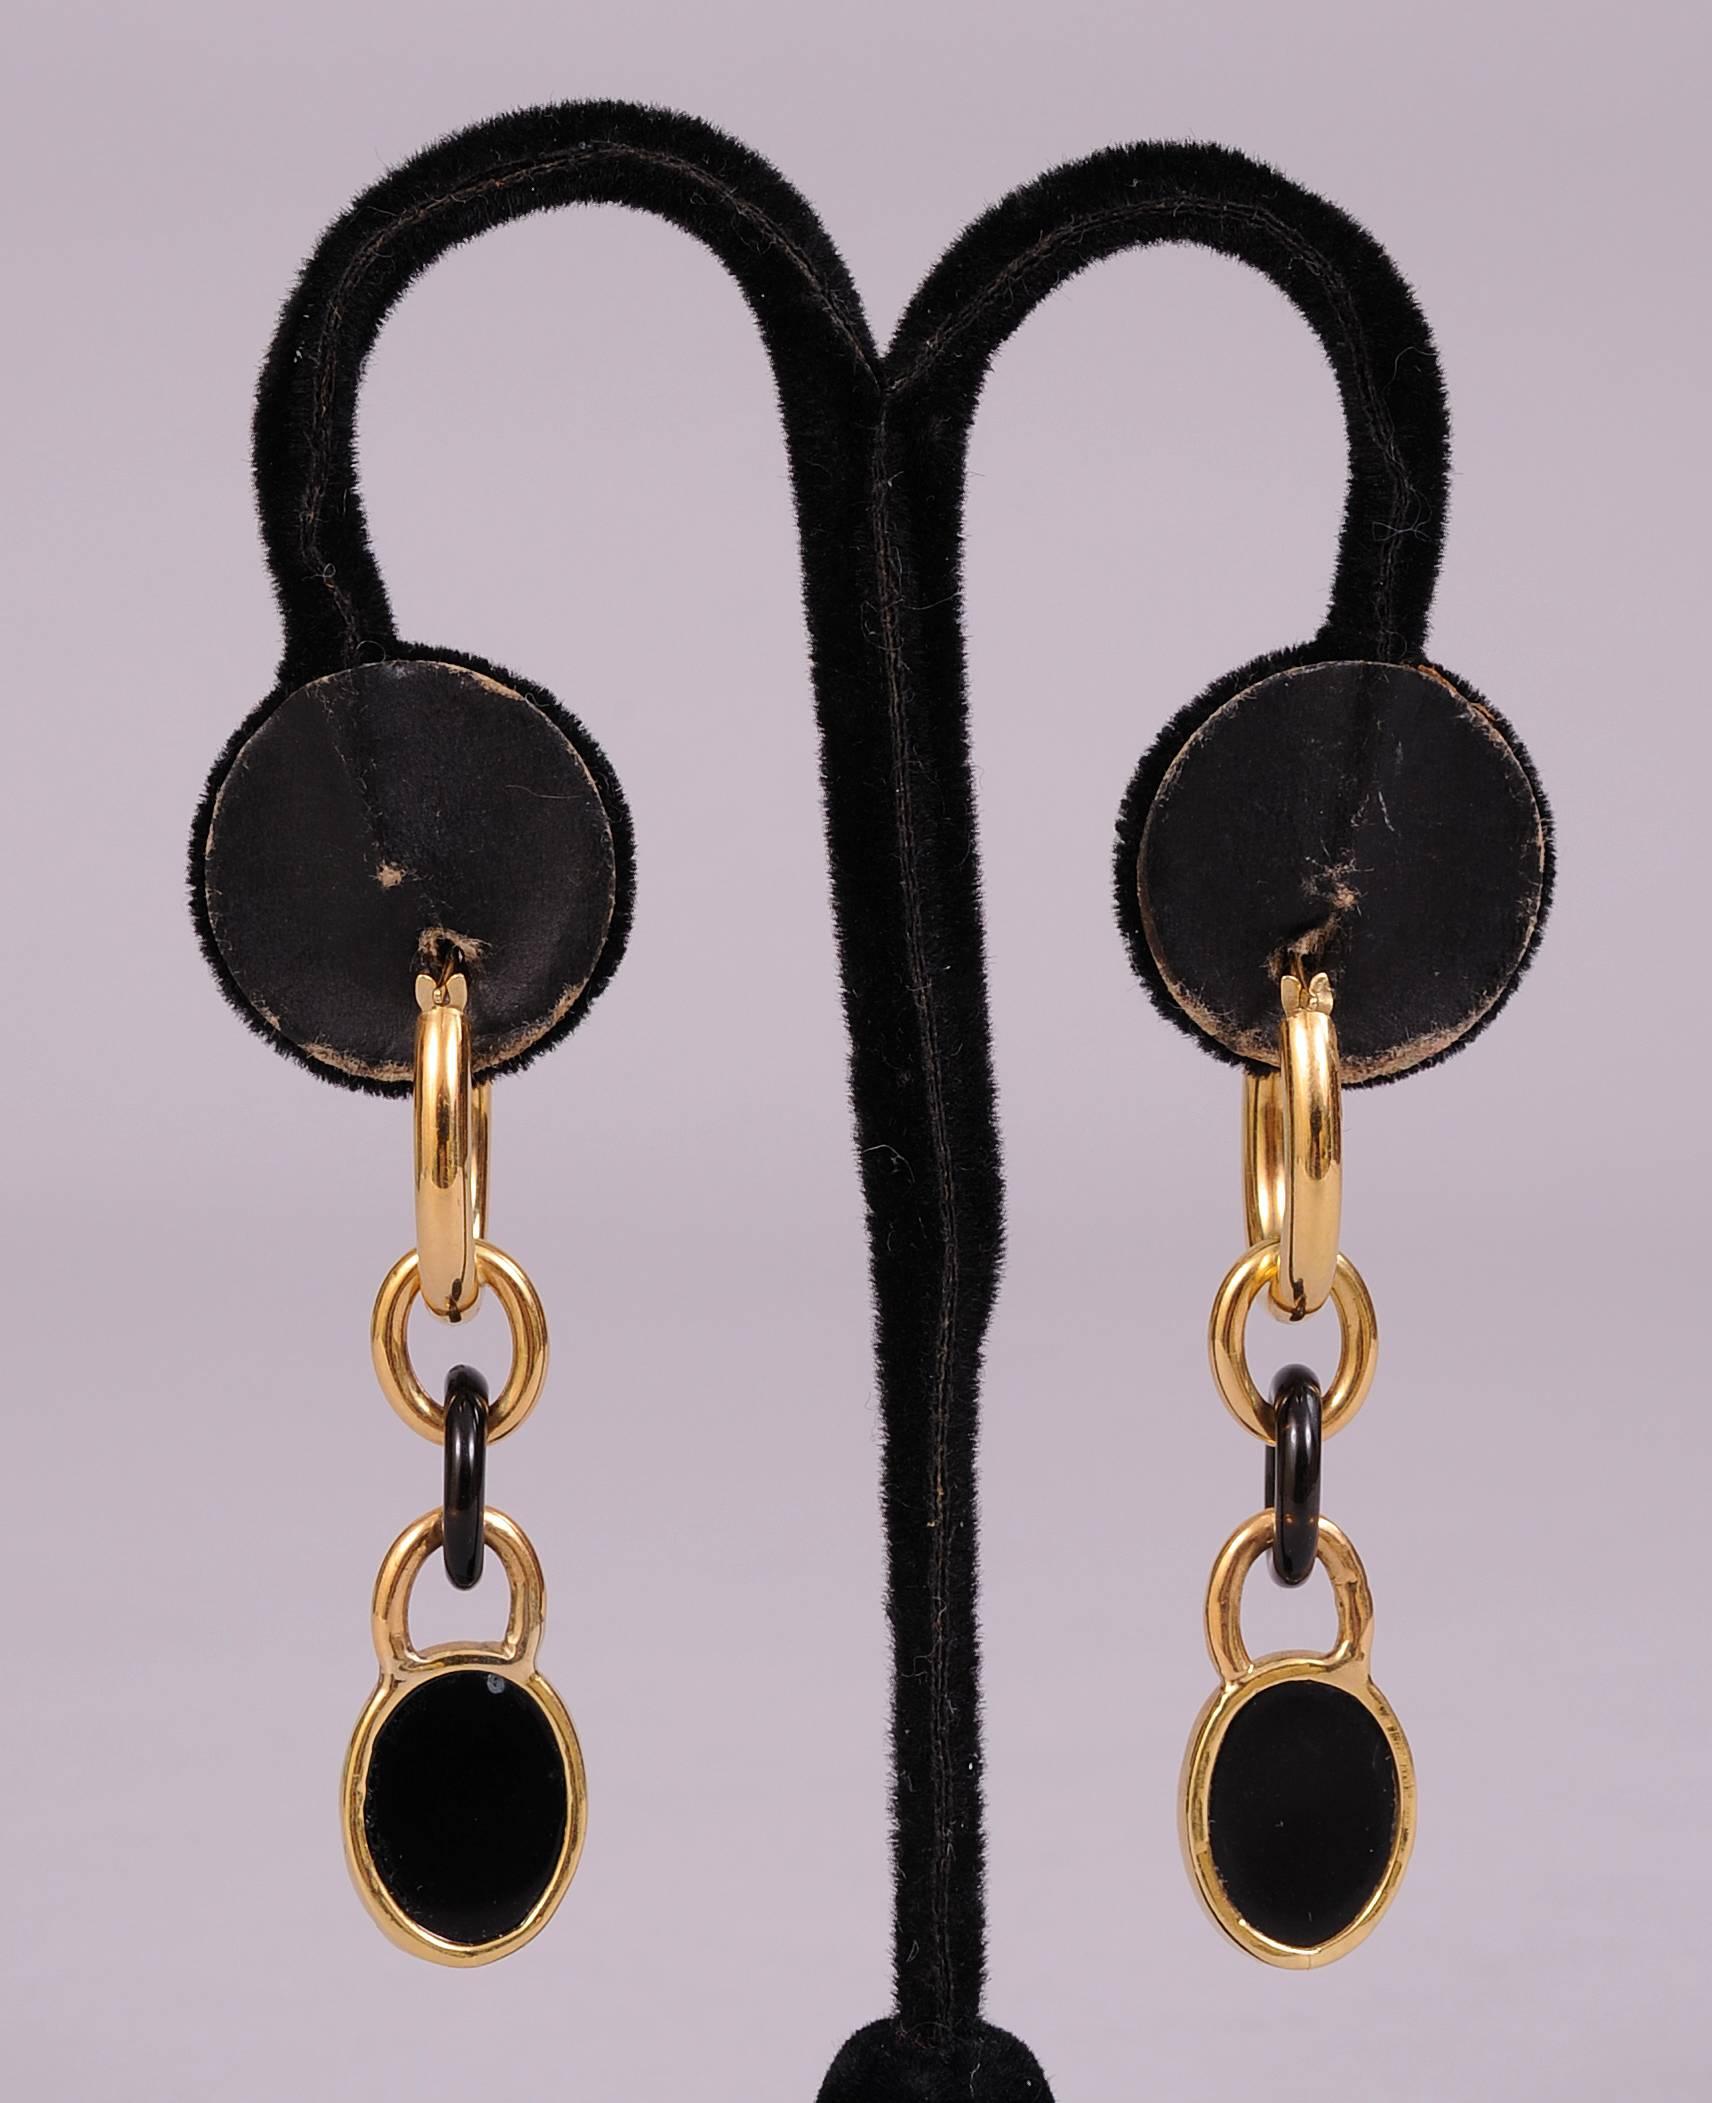 Modern 18K Gold and Onyx Vintage Pierced Earrings, Made in Italy